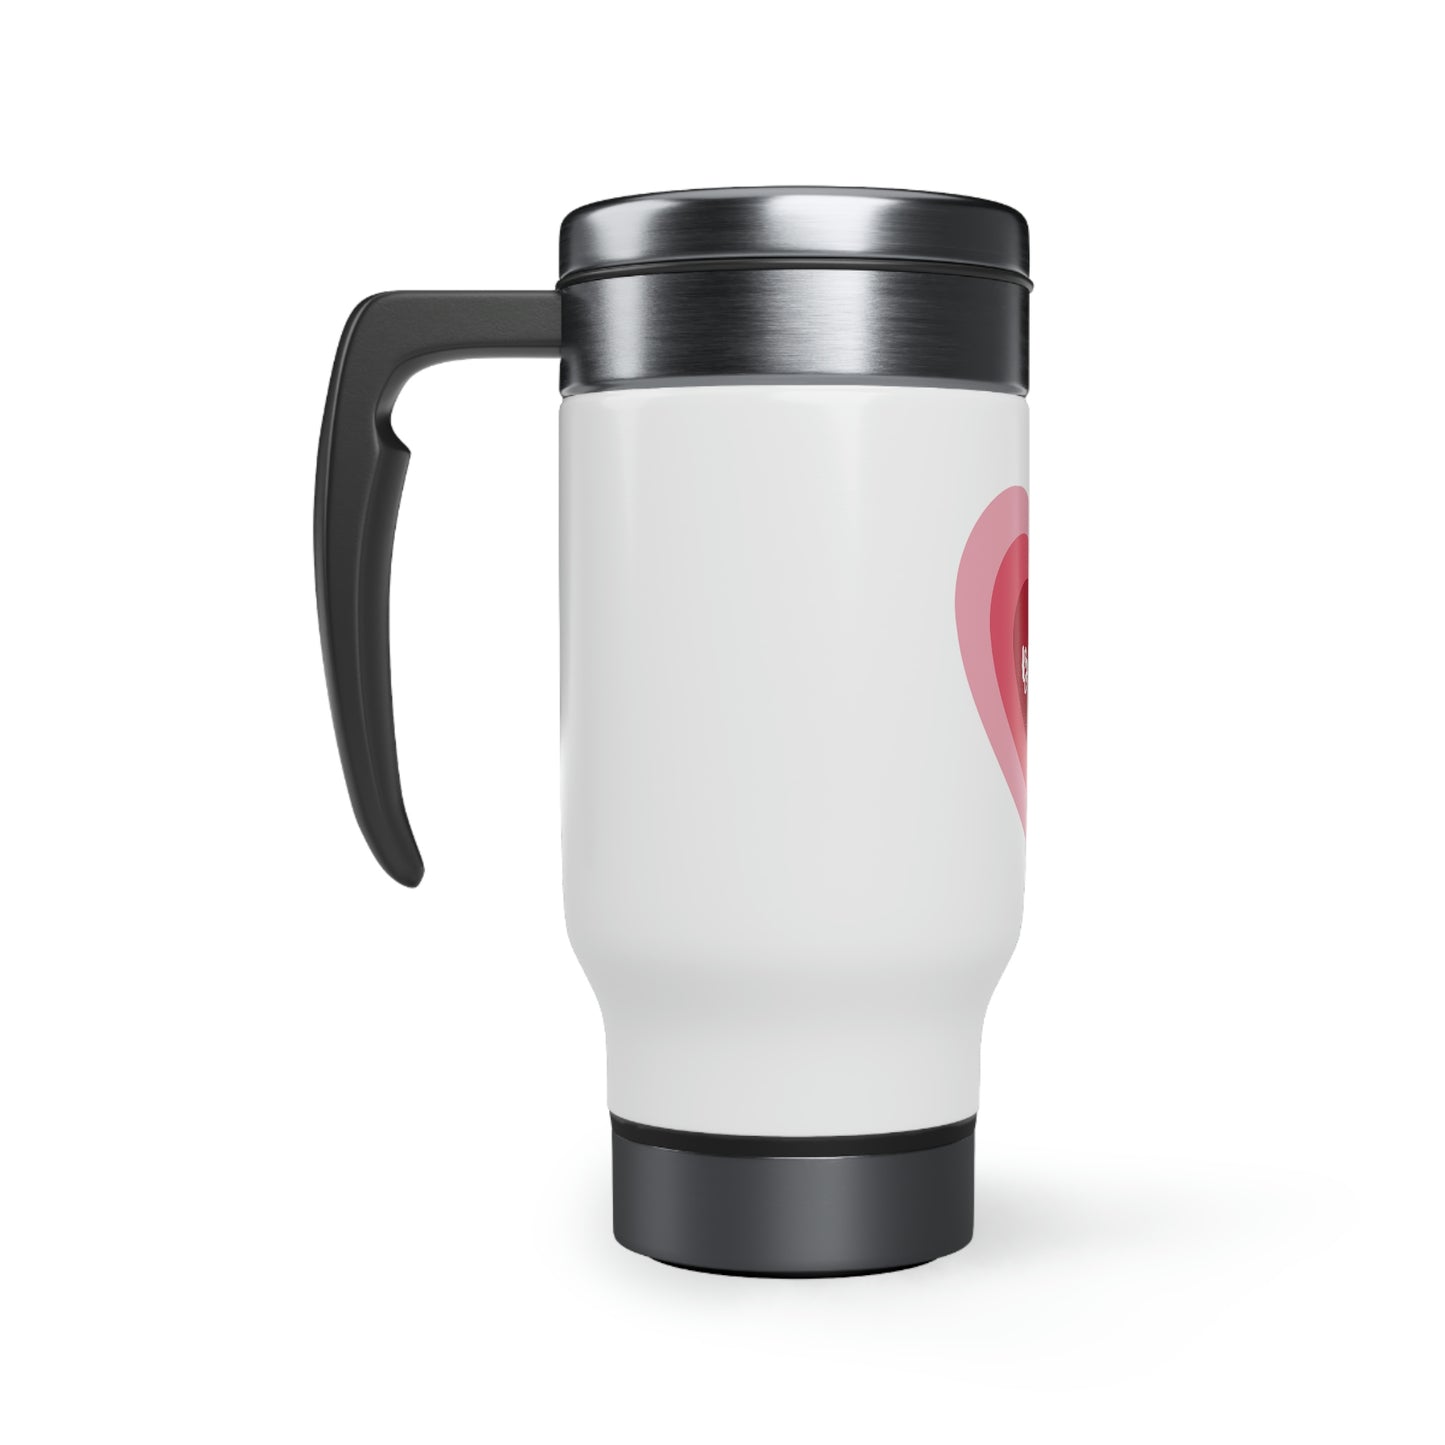 Blessed Heart - Stainless Steel Travel Mug with Handle, 14oz